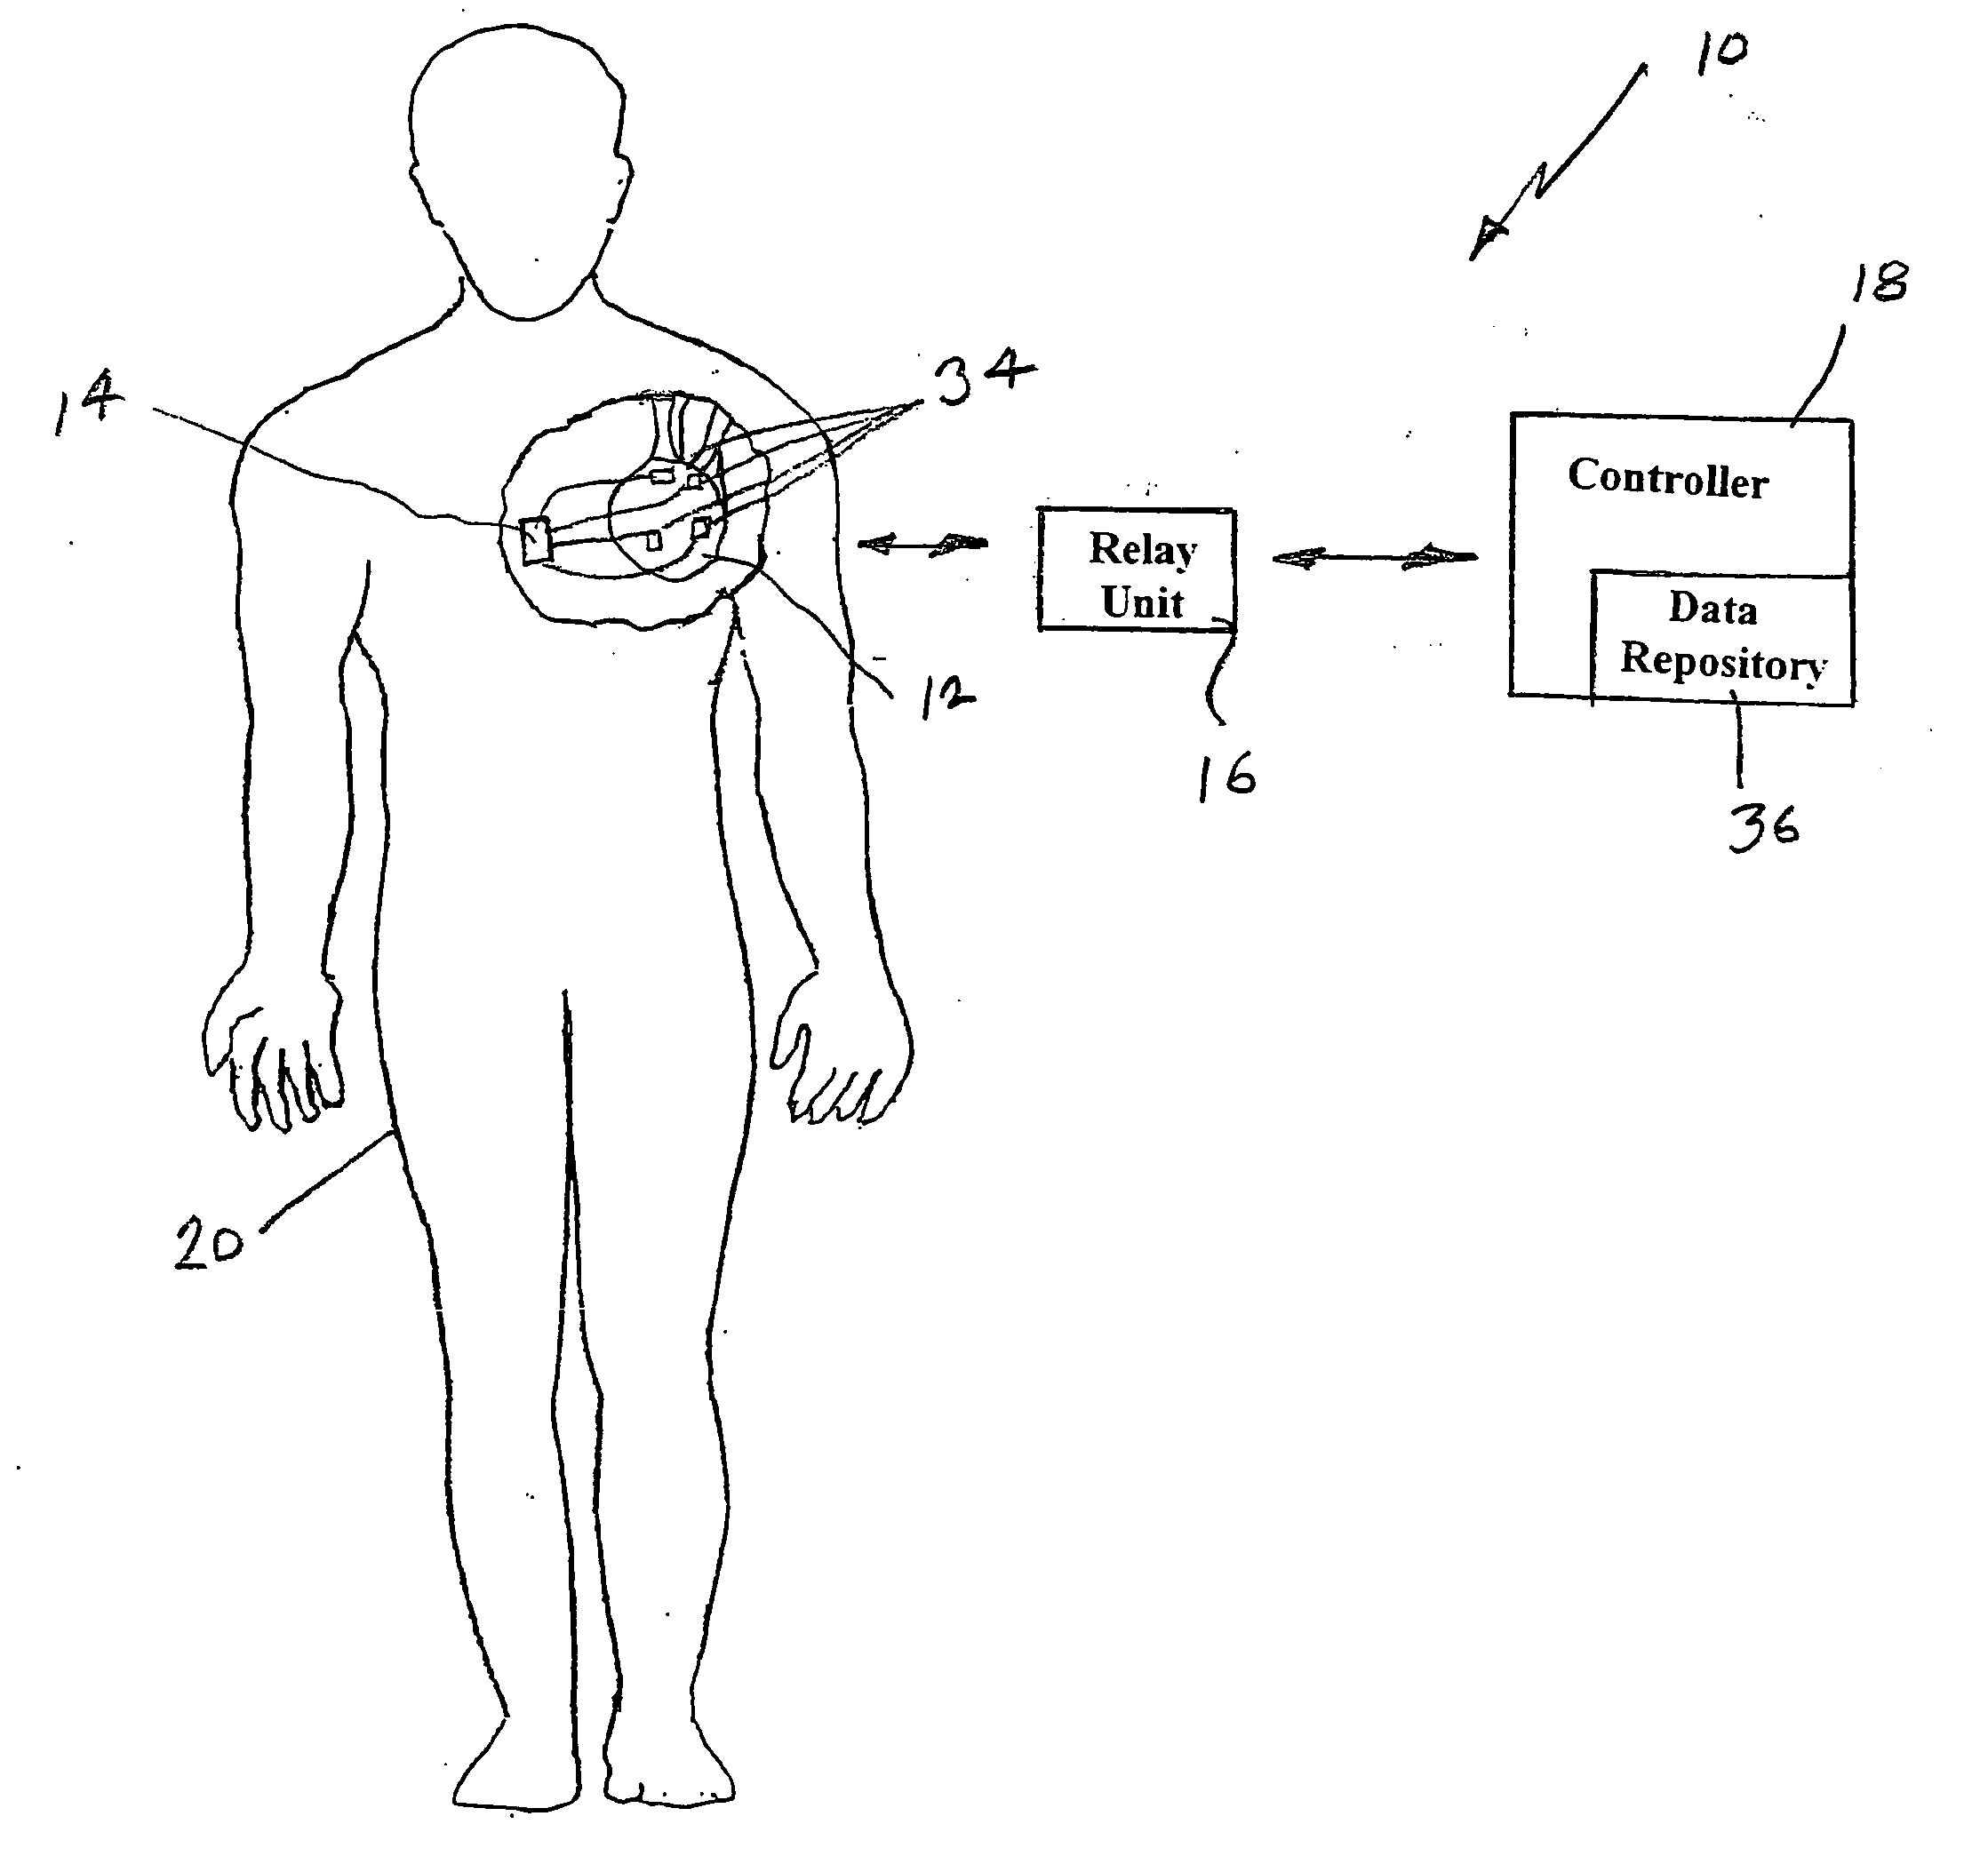 Systems, methods and computer program products for heart monitoring